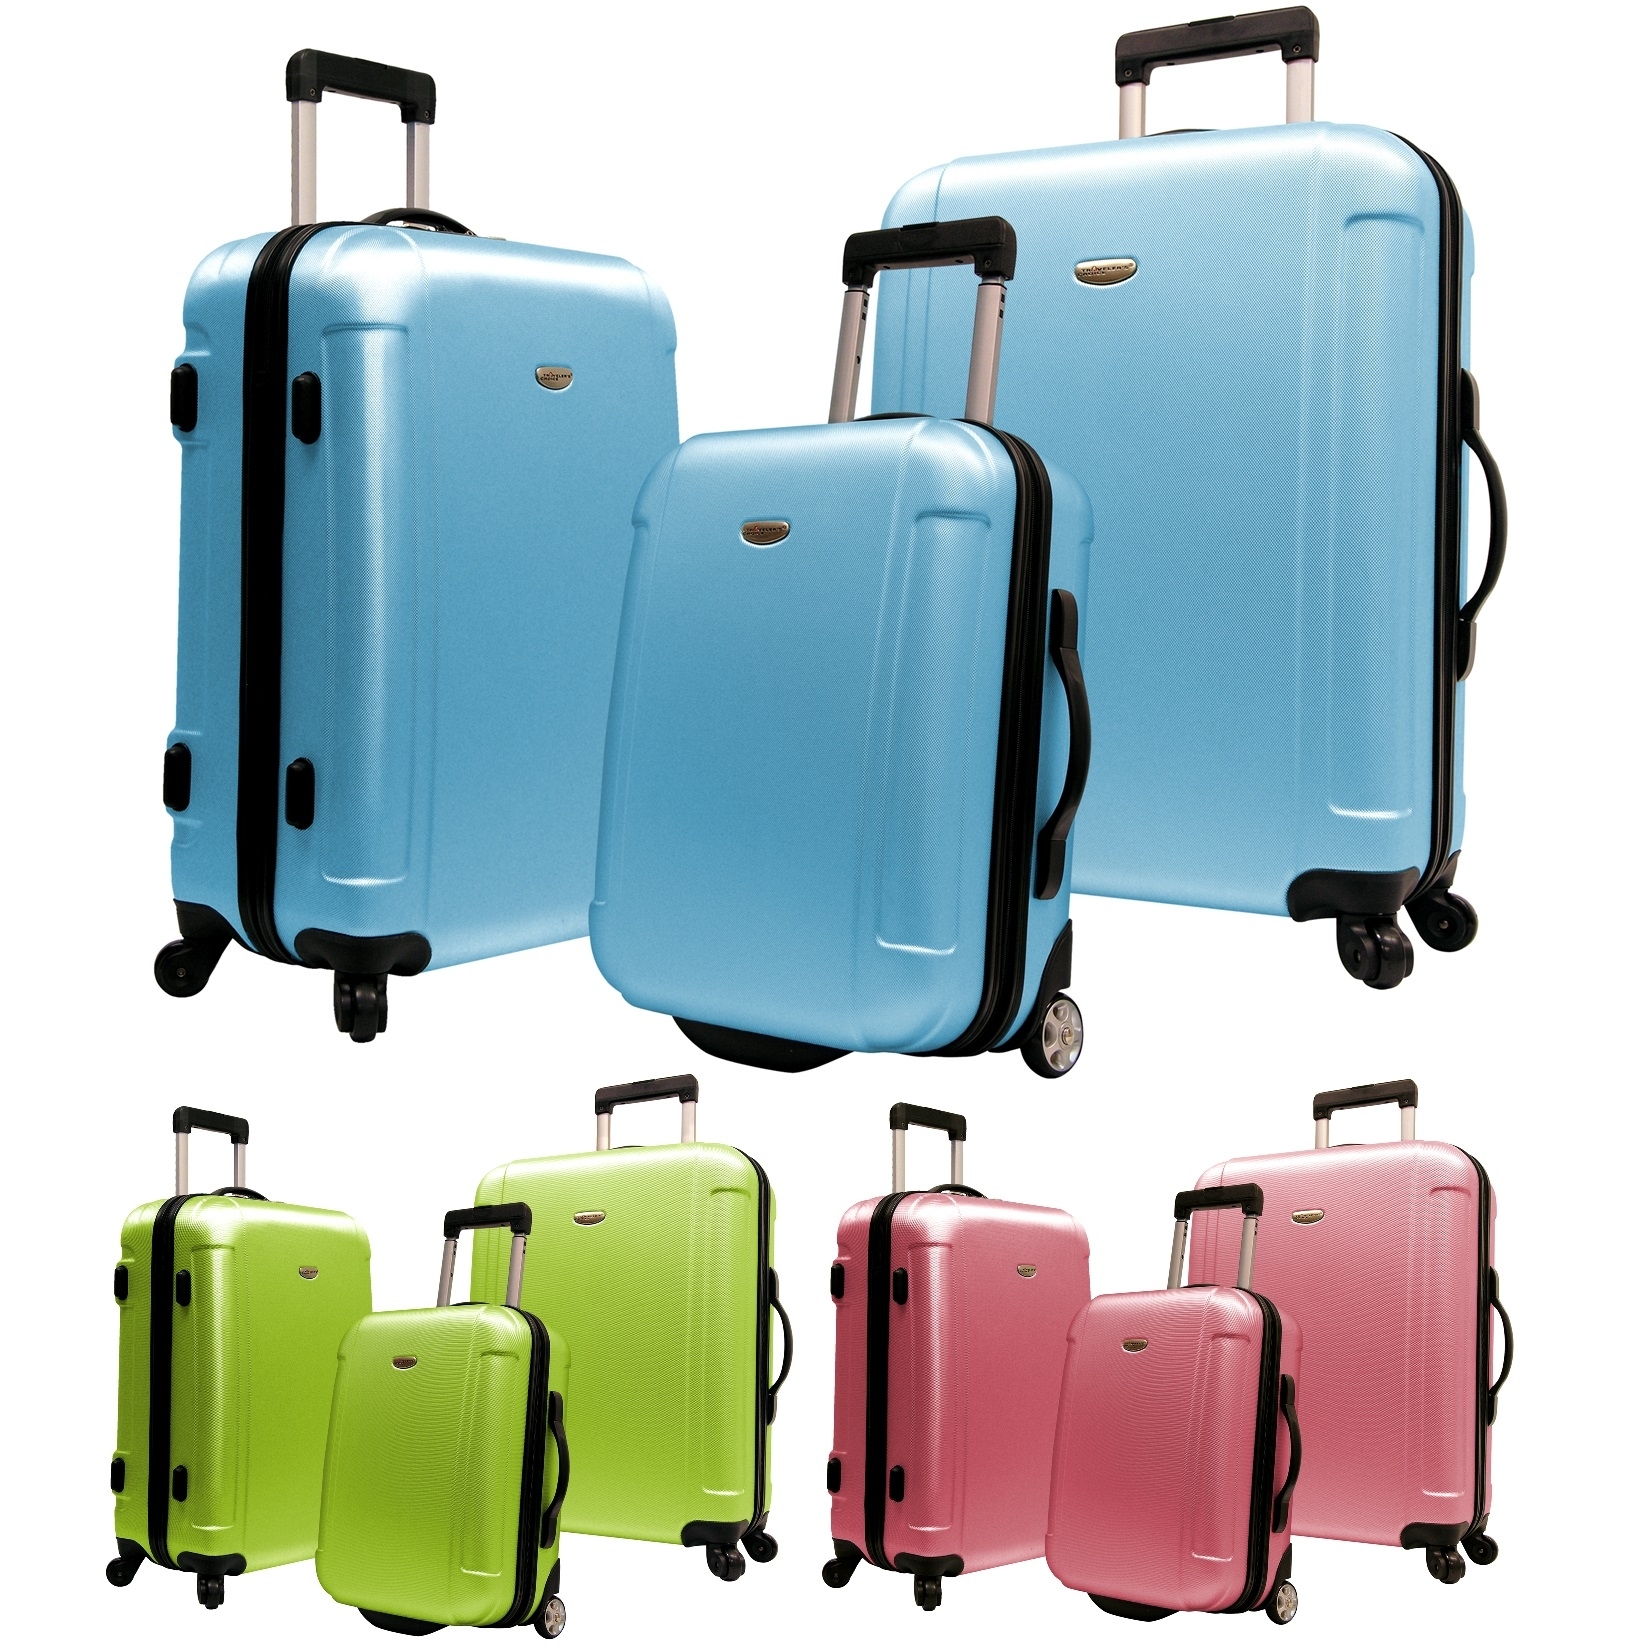 Traveler's Choice Freedom 3-Piece Ultra-Lightweight Hardside Spinners & Roller Luggage Set - 21" 25" 29" - image 1 of 10